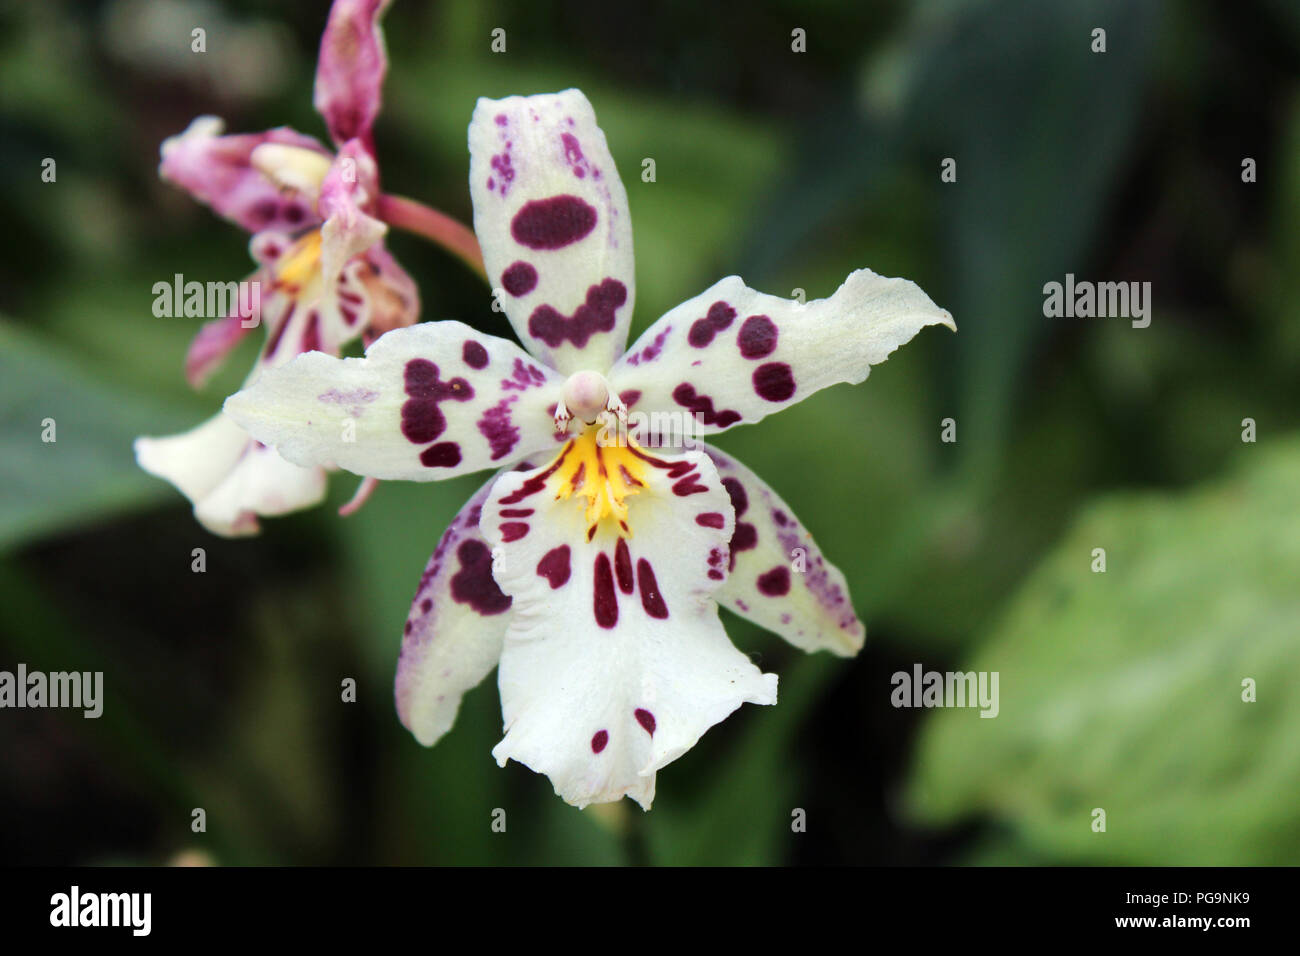 Close up of an Odontoglossum orchid with white petals with purple spots Stock Photo